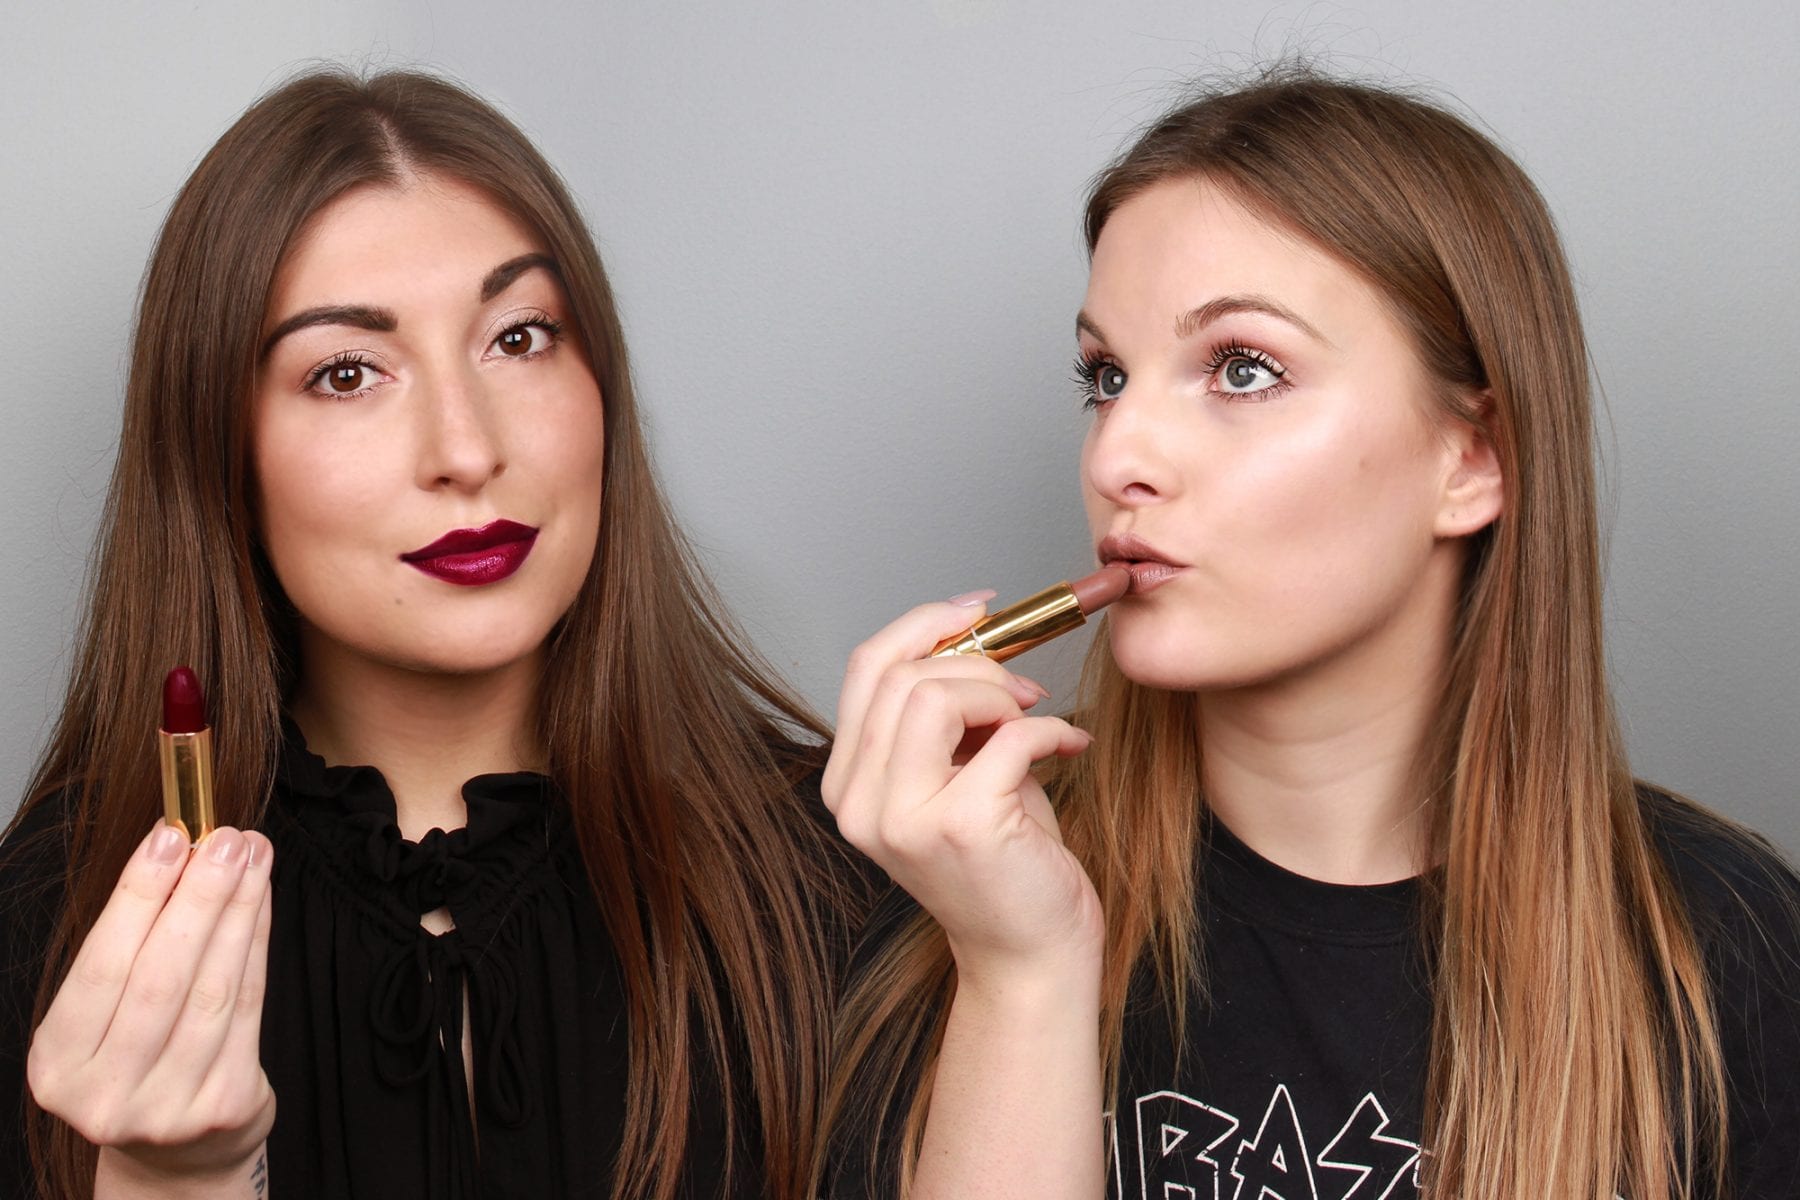 Two Lipsticks, Two Looks, Your Choice…